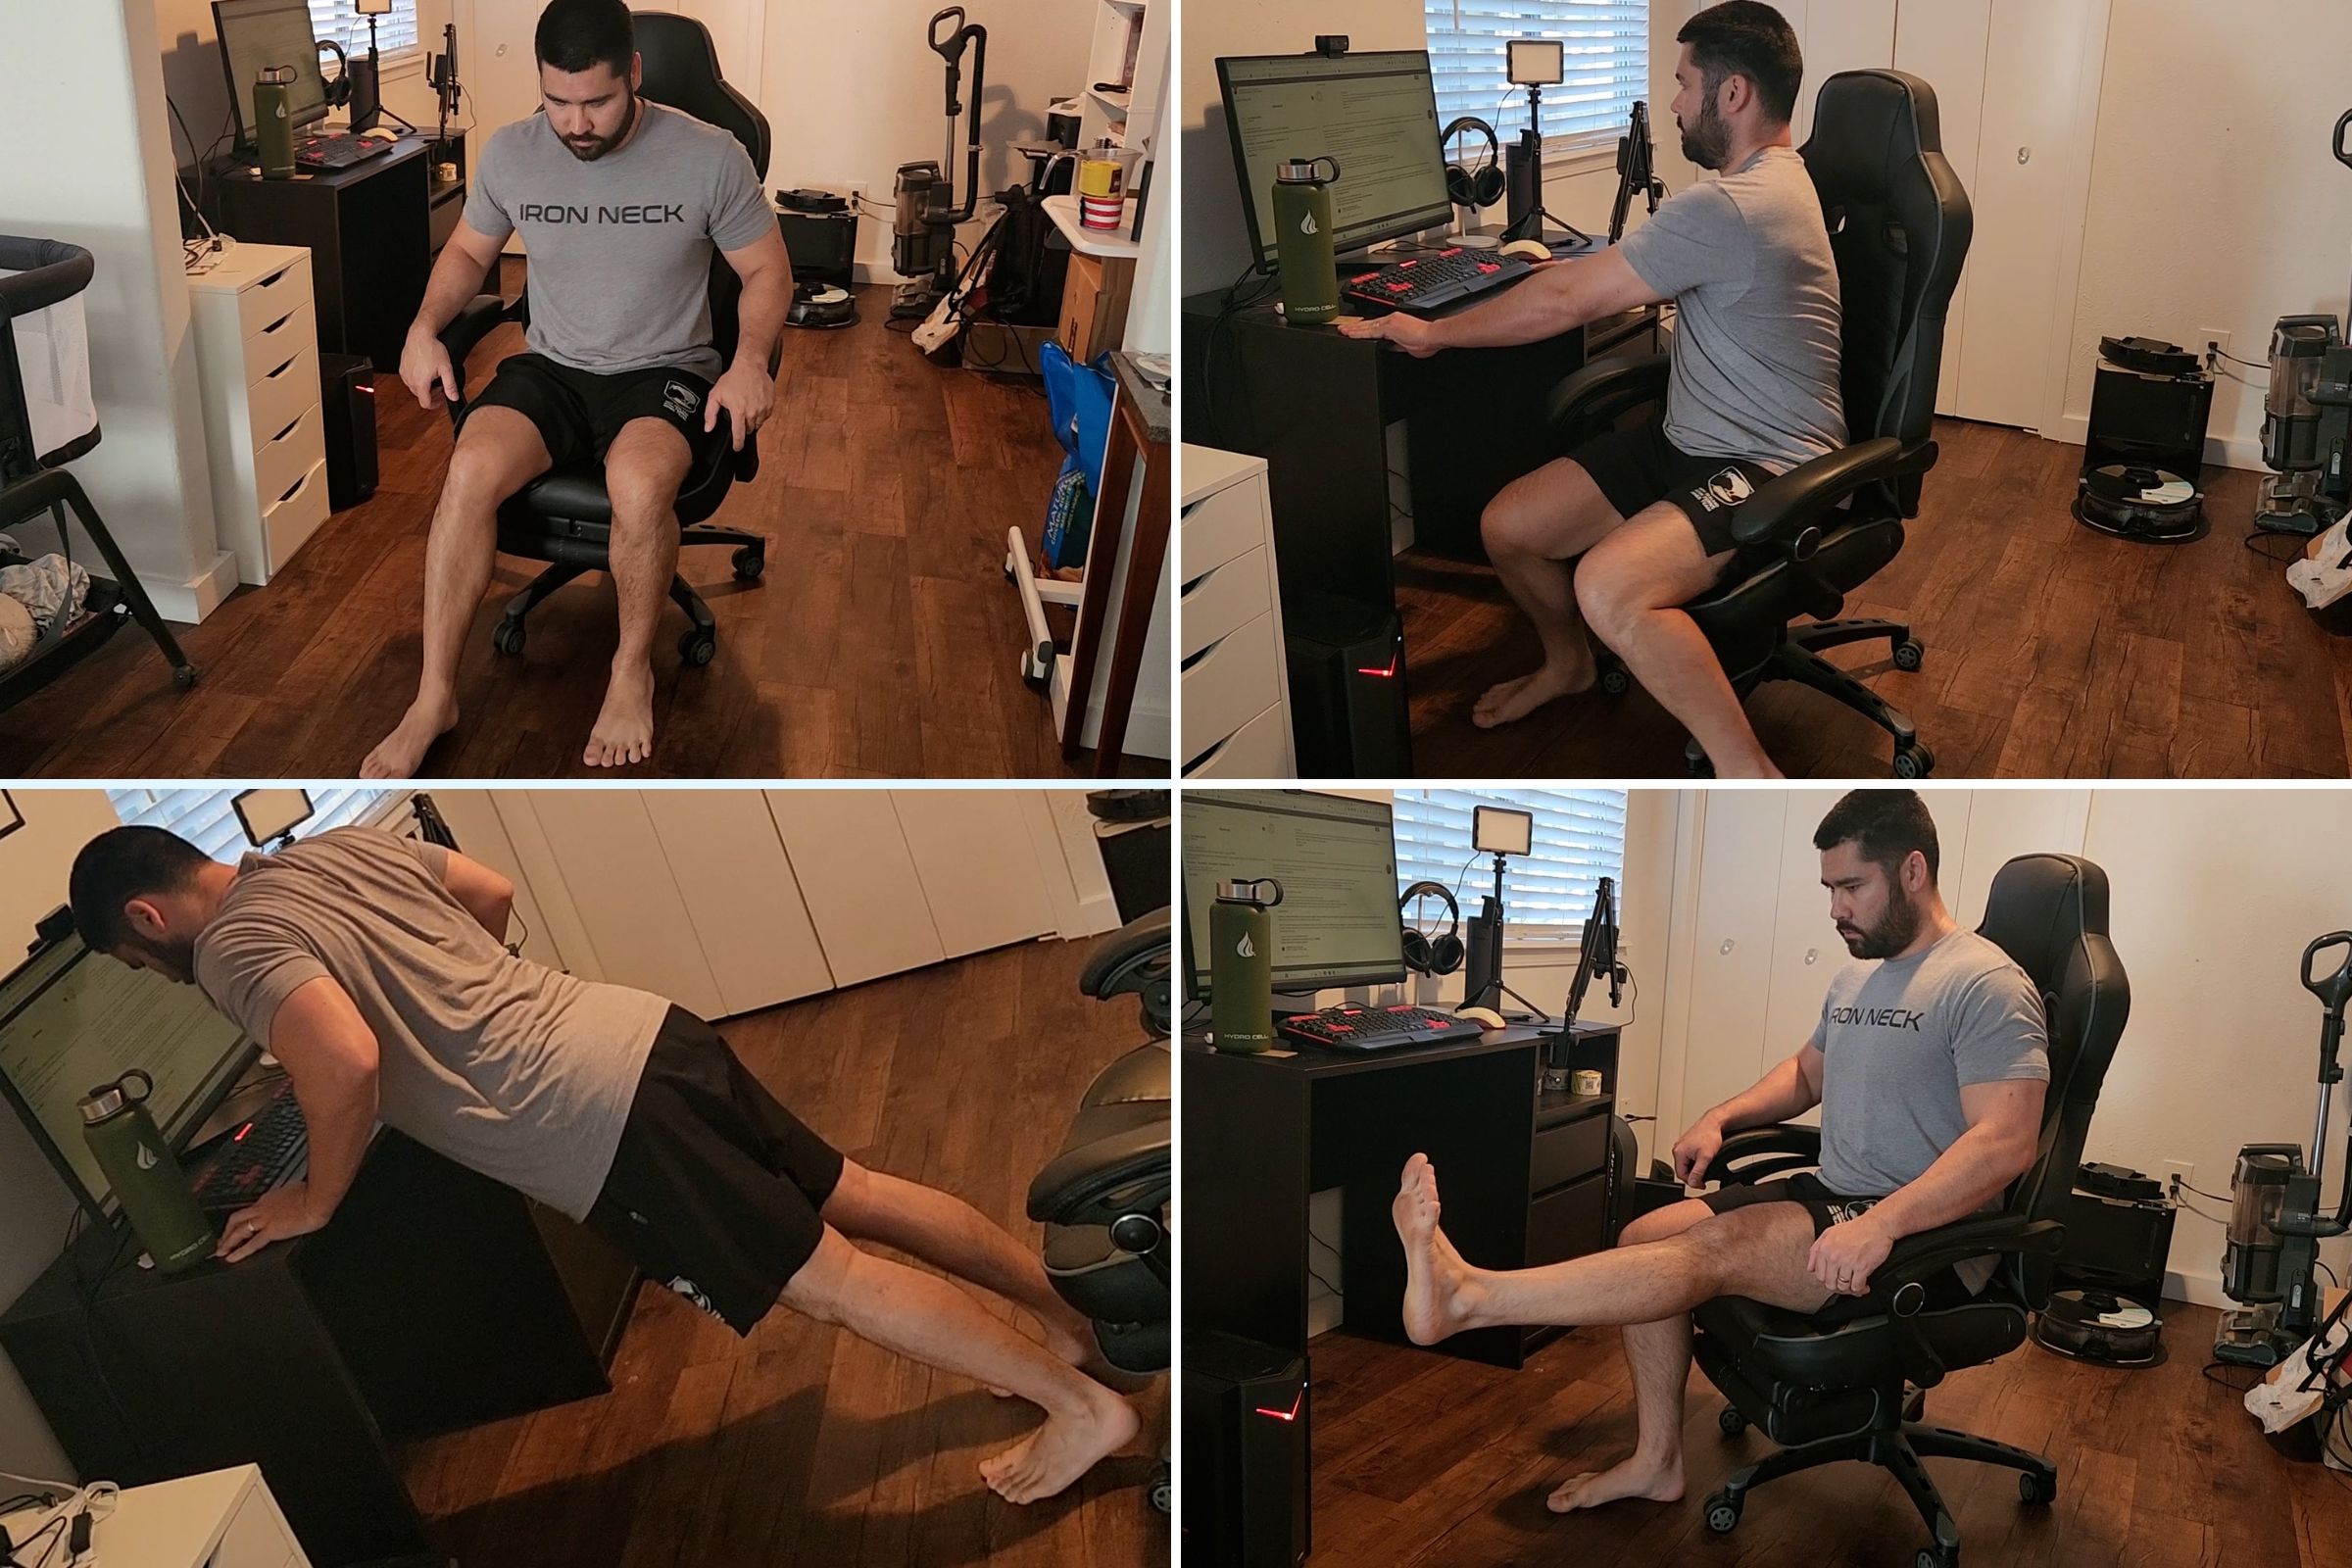 Lifes Daily Choices - Exercise: Simple Chair Exercises That You